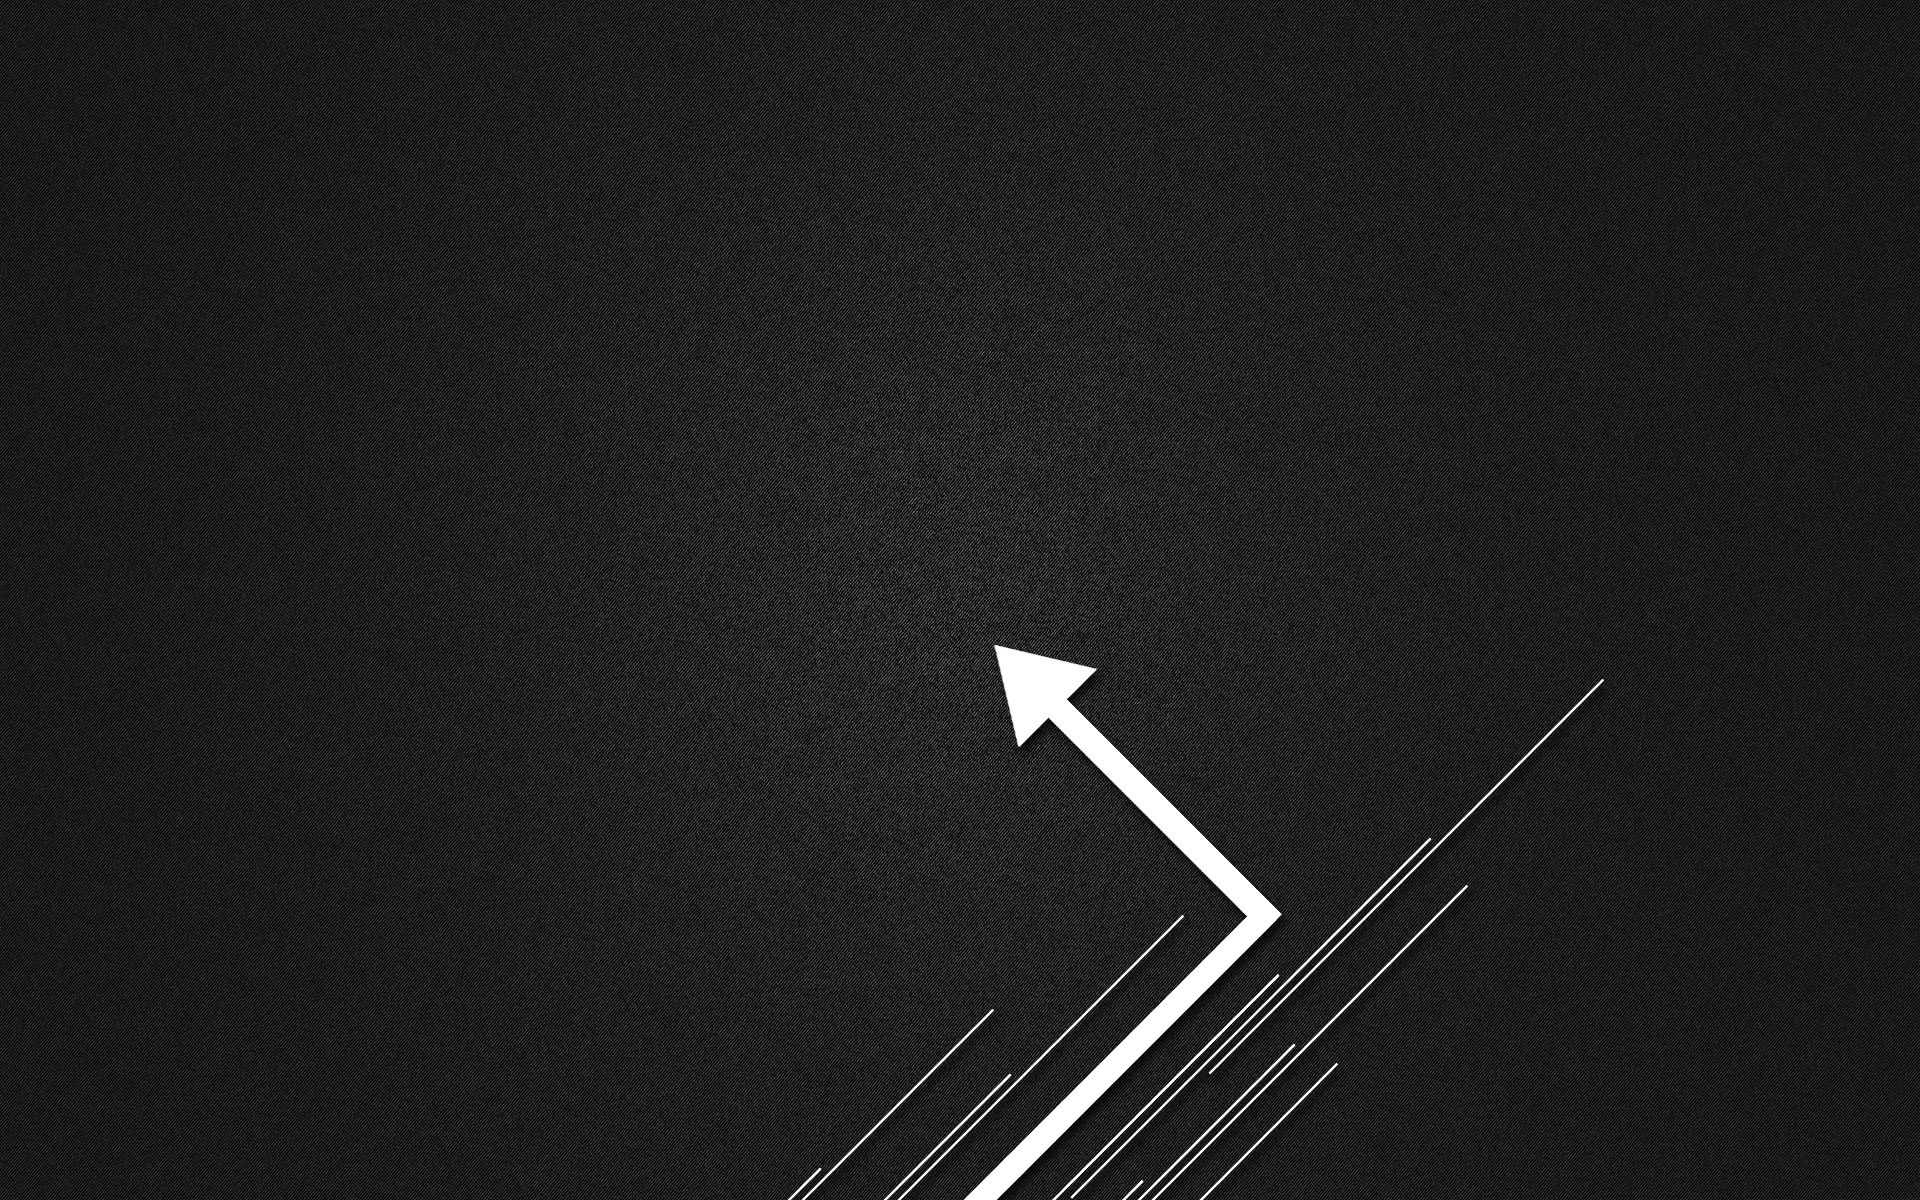 Free download HD wallpaper Minimalism lines style Minimalism 1920x1200 [1920x1200] for your Desktop, Mobile & Tablet. Explore Minimalist HD WallpaperP Minimalist Wallpaper, Free Desktop Wallpaper Designs, Minimalist Wallpaper for Desktop